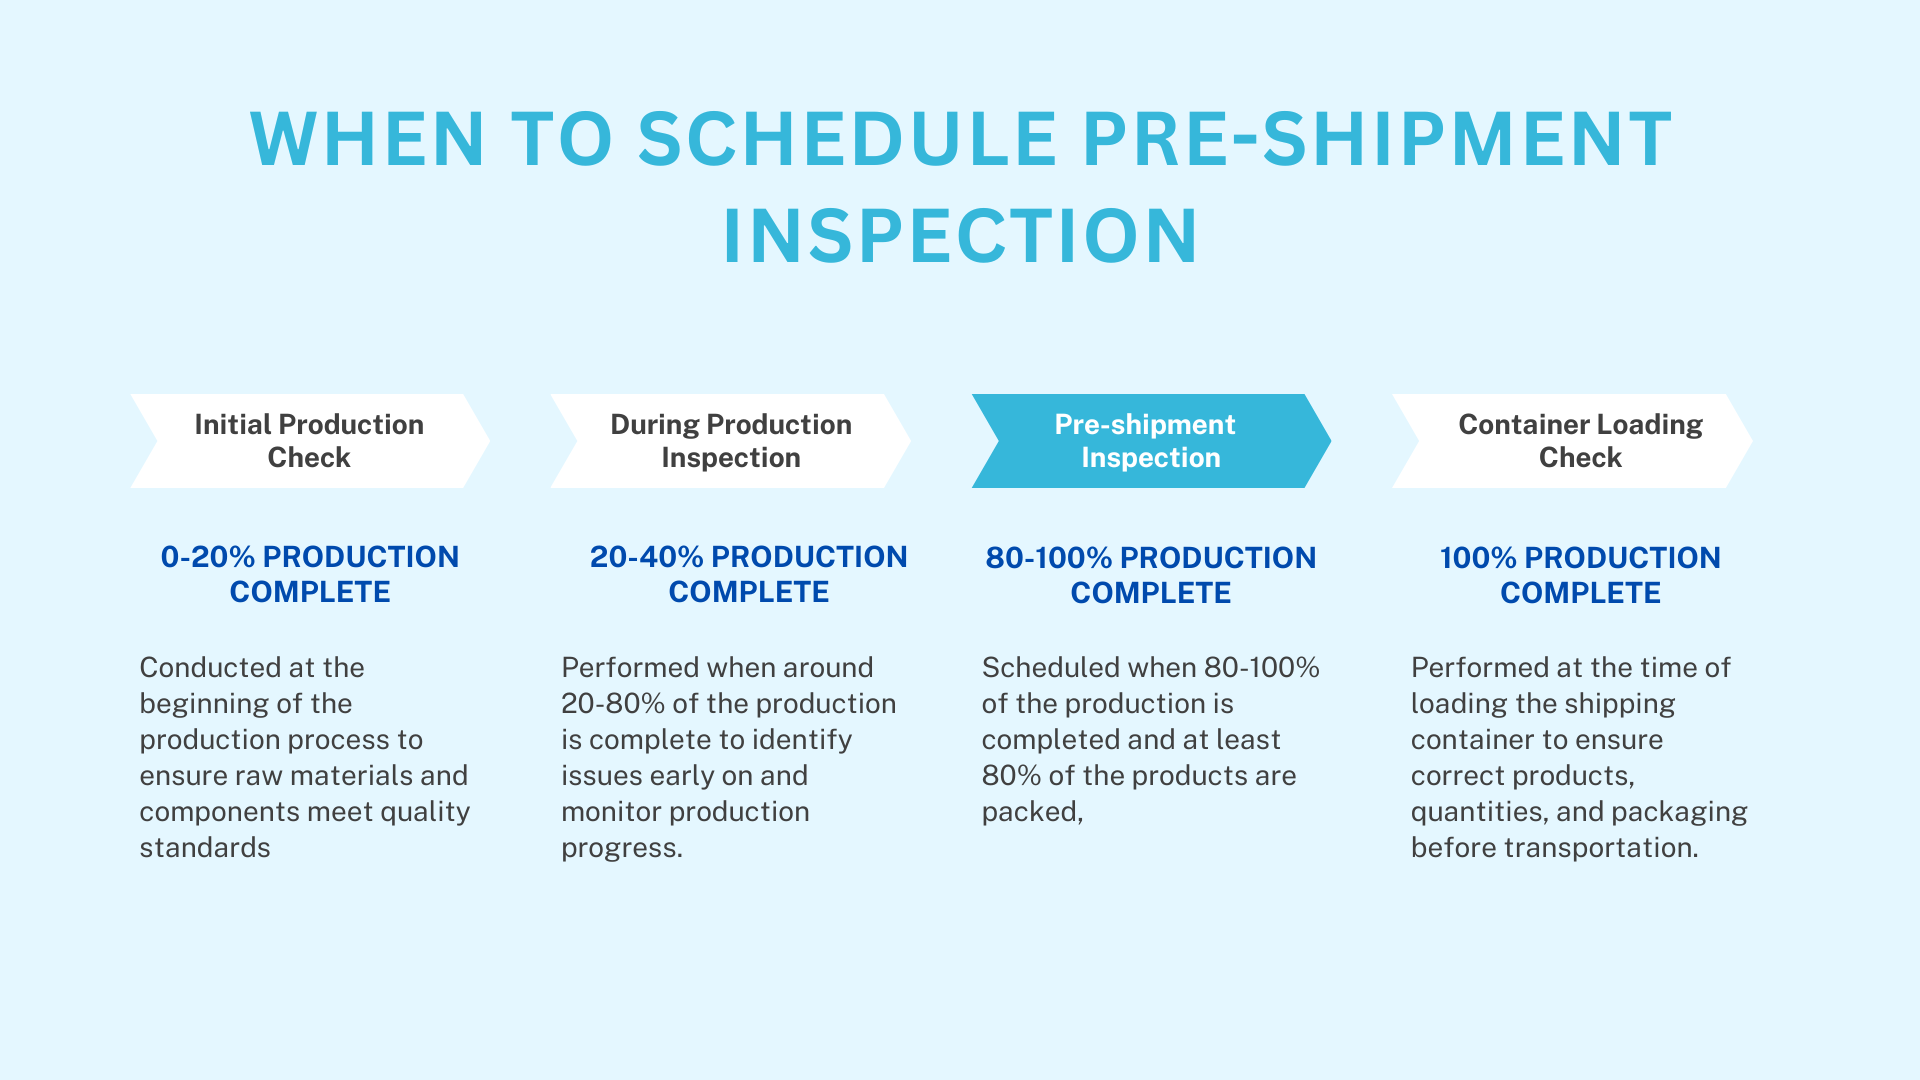 WHEN TO SCHEDULE PRE-SHIPMENT INSPECTION